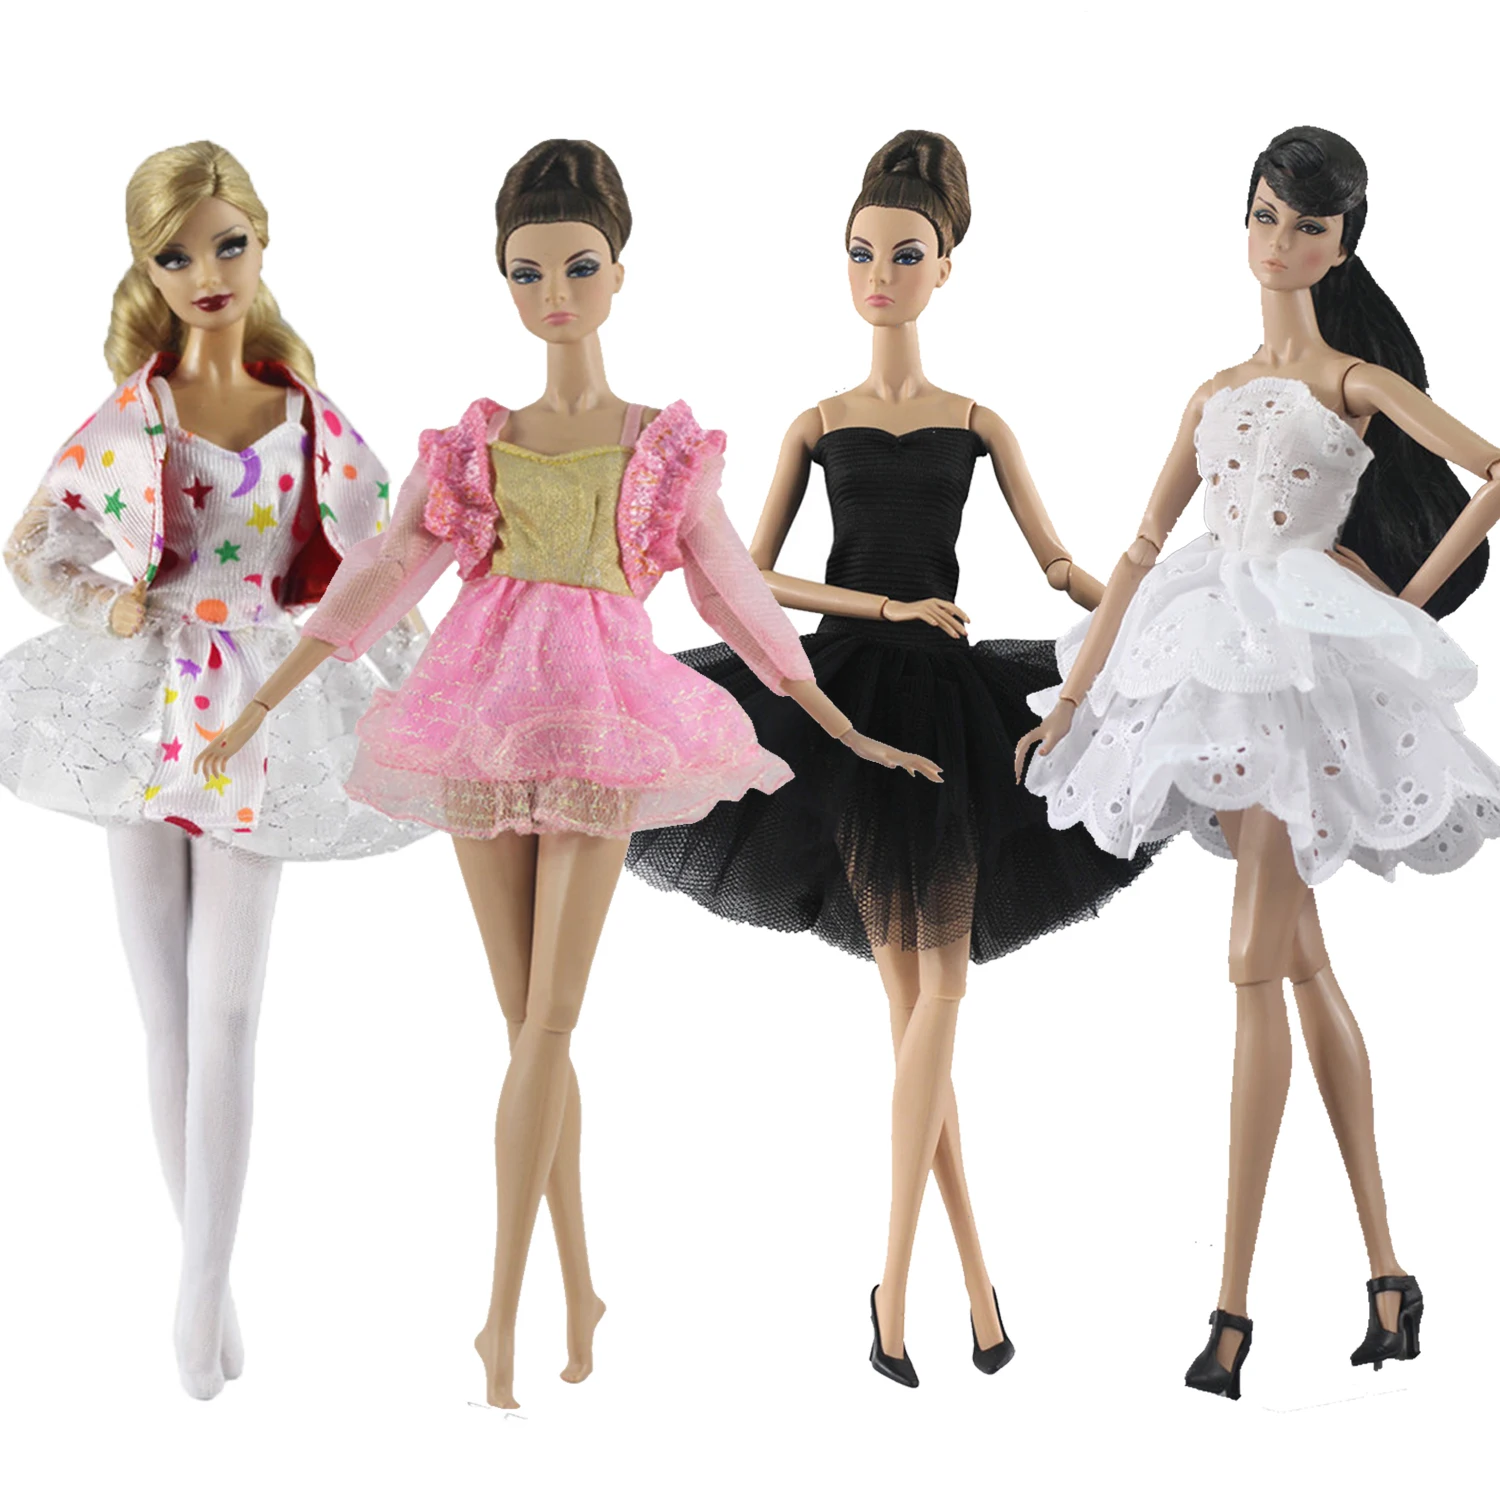 

Fashion Doll Clothes 4 set Dress for Barbie Dancing Tutu Tulle Ballet Dress 1/6 Dolls Accessories Kids Toys for Girl Best Gift